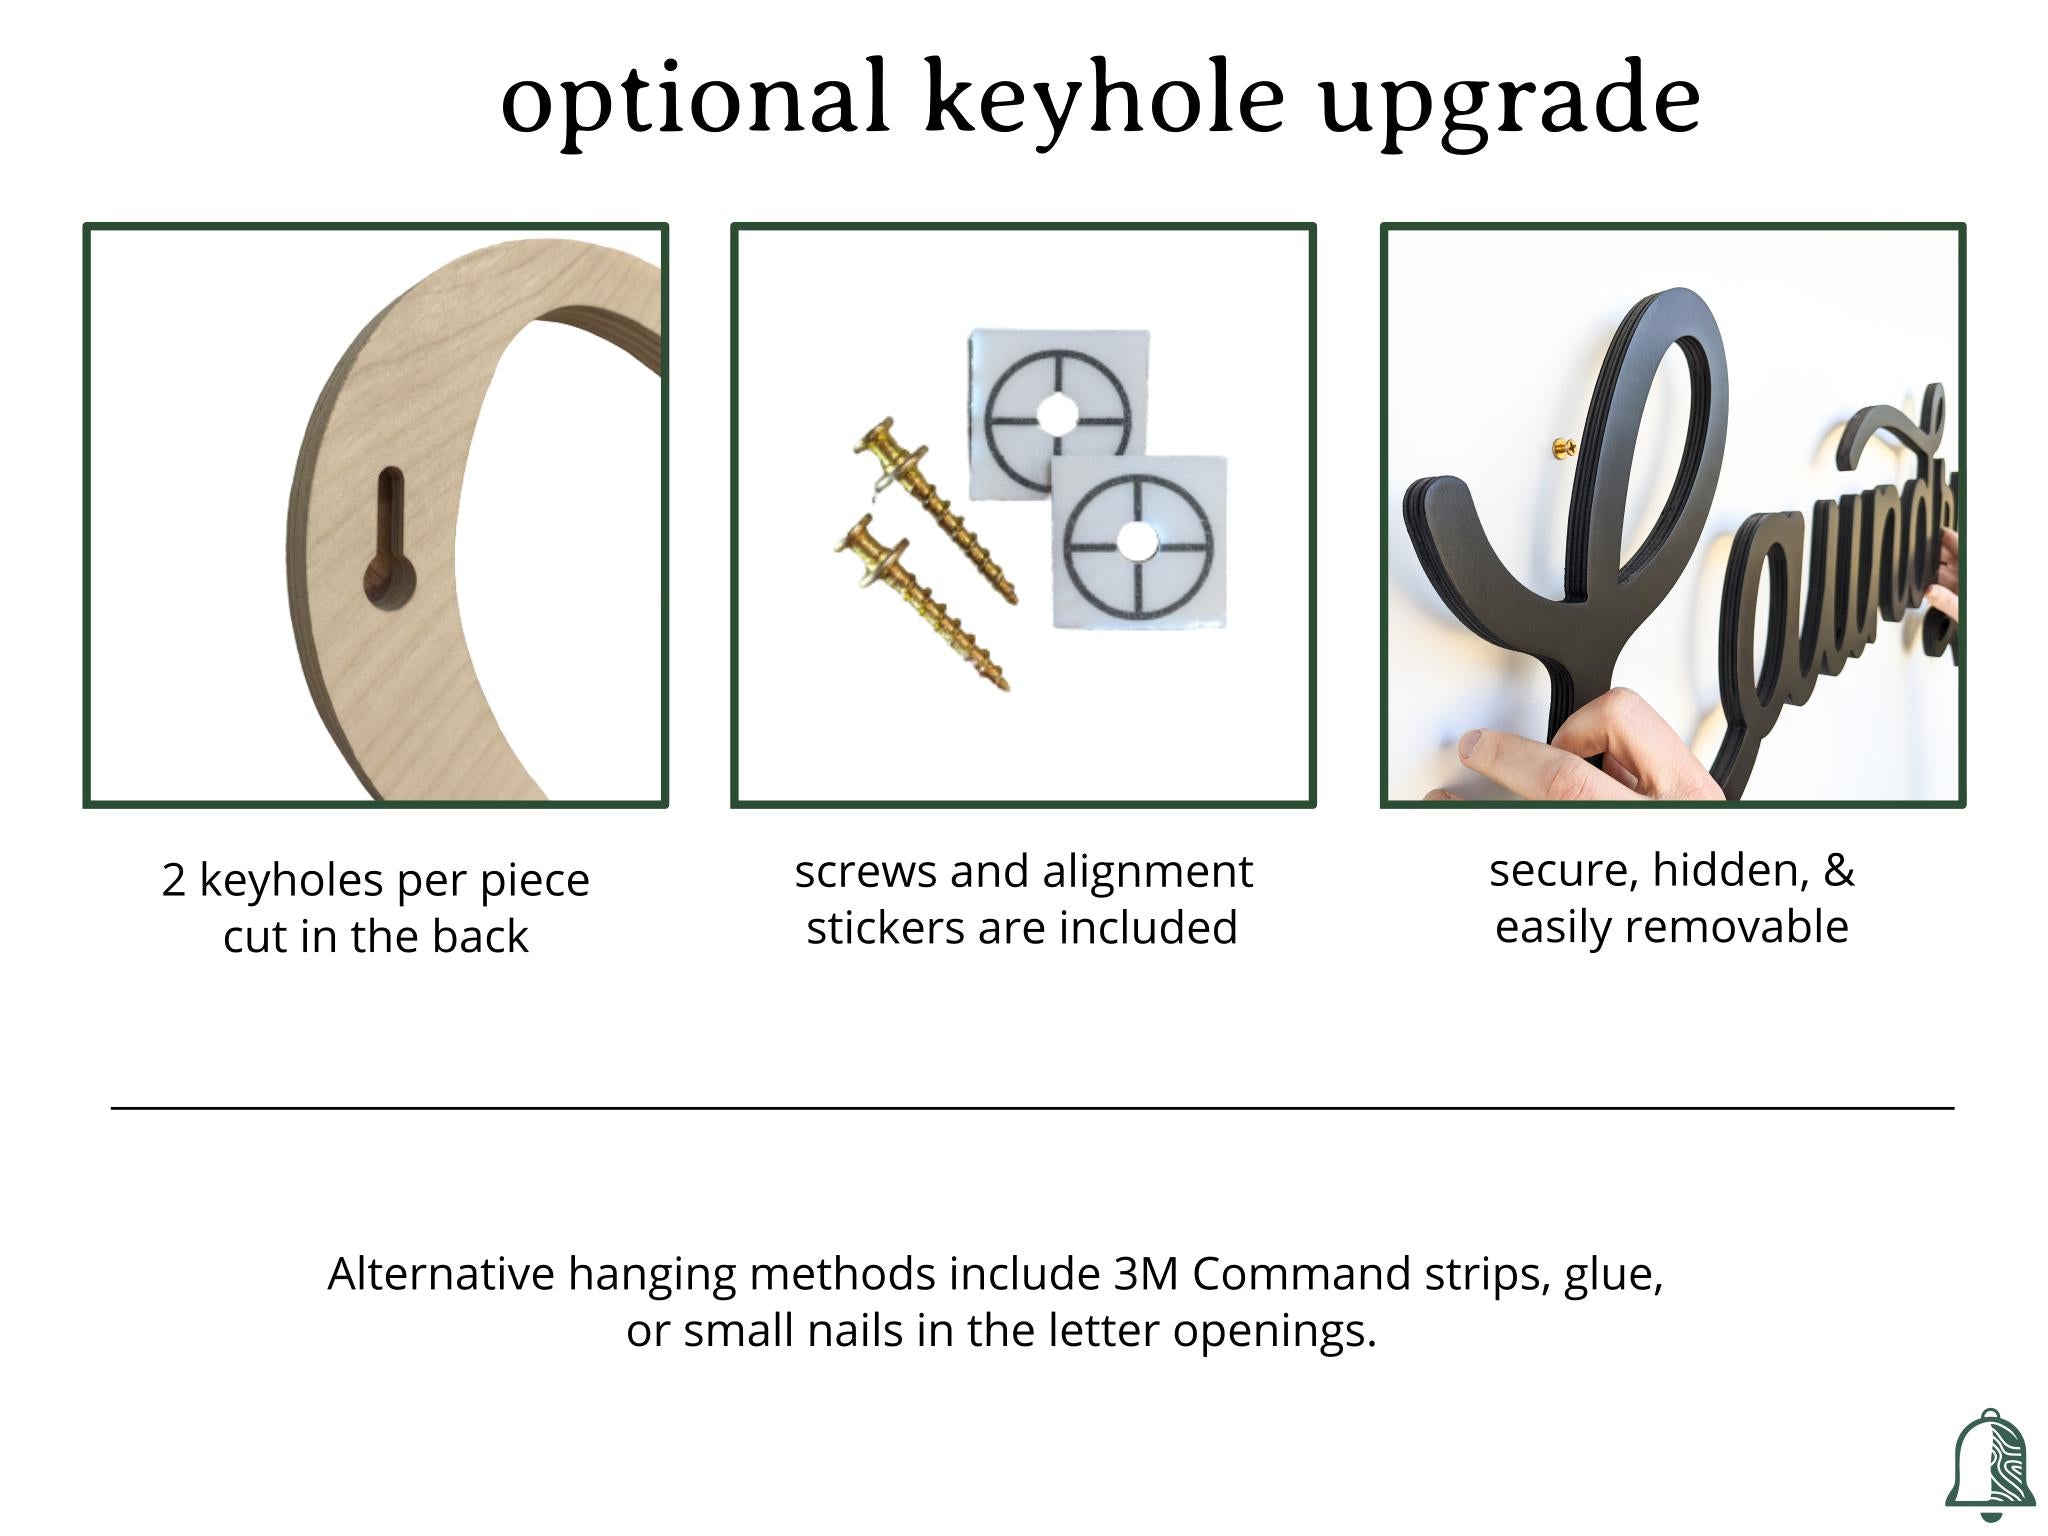 Description of the option to add keyholes to your product